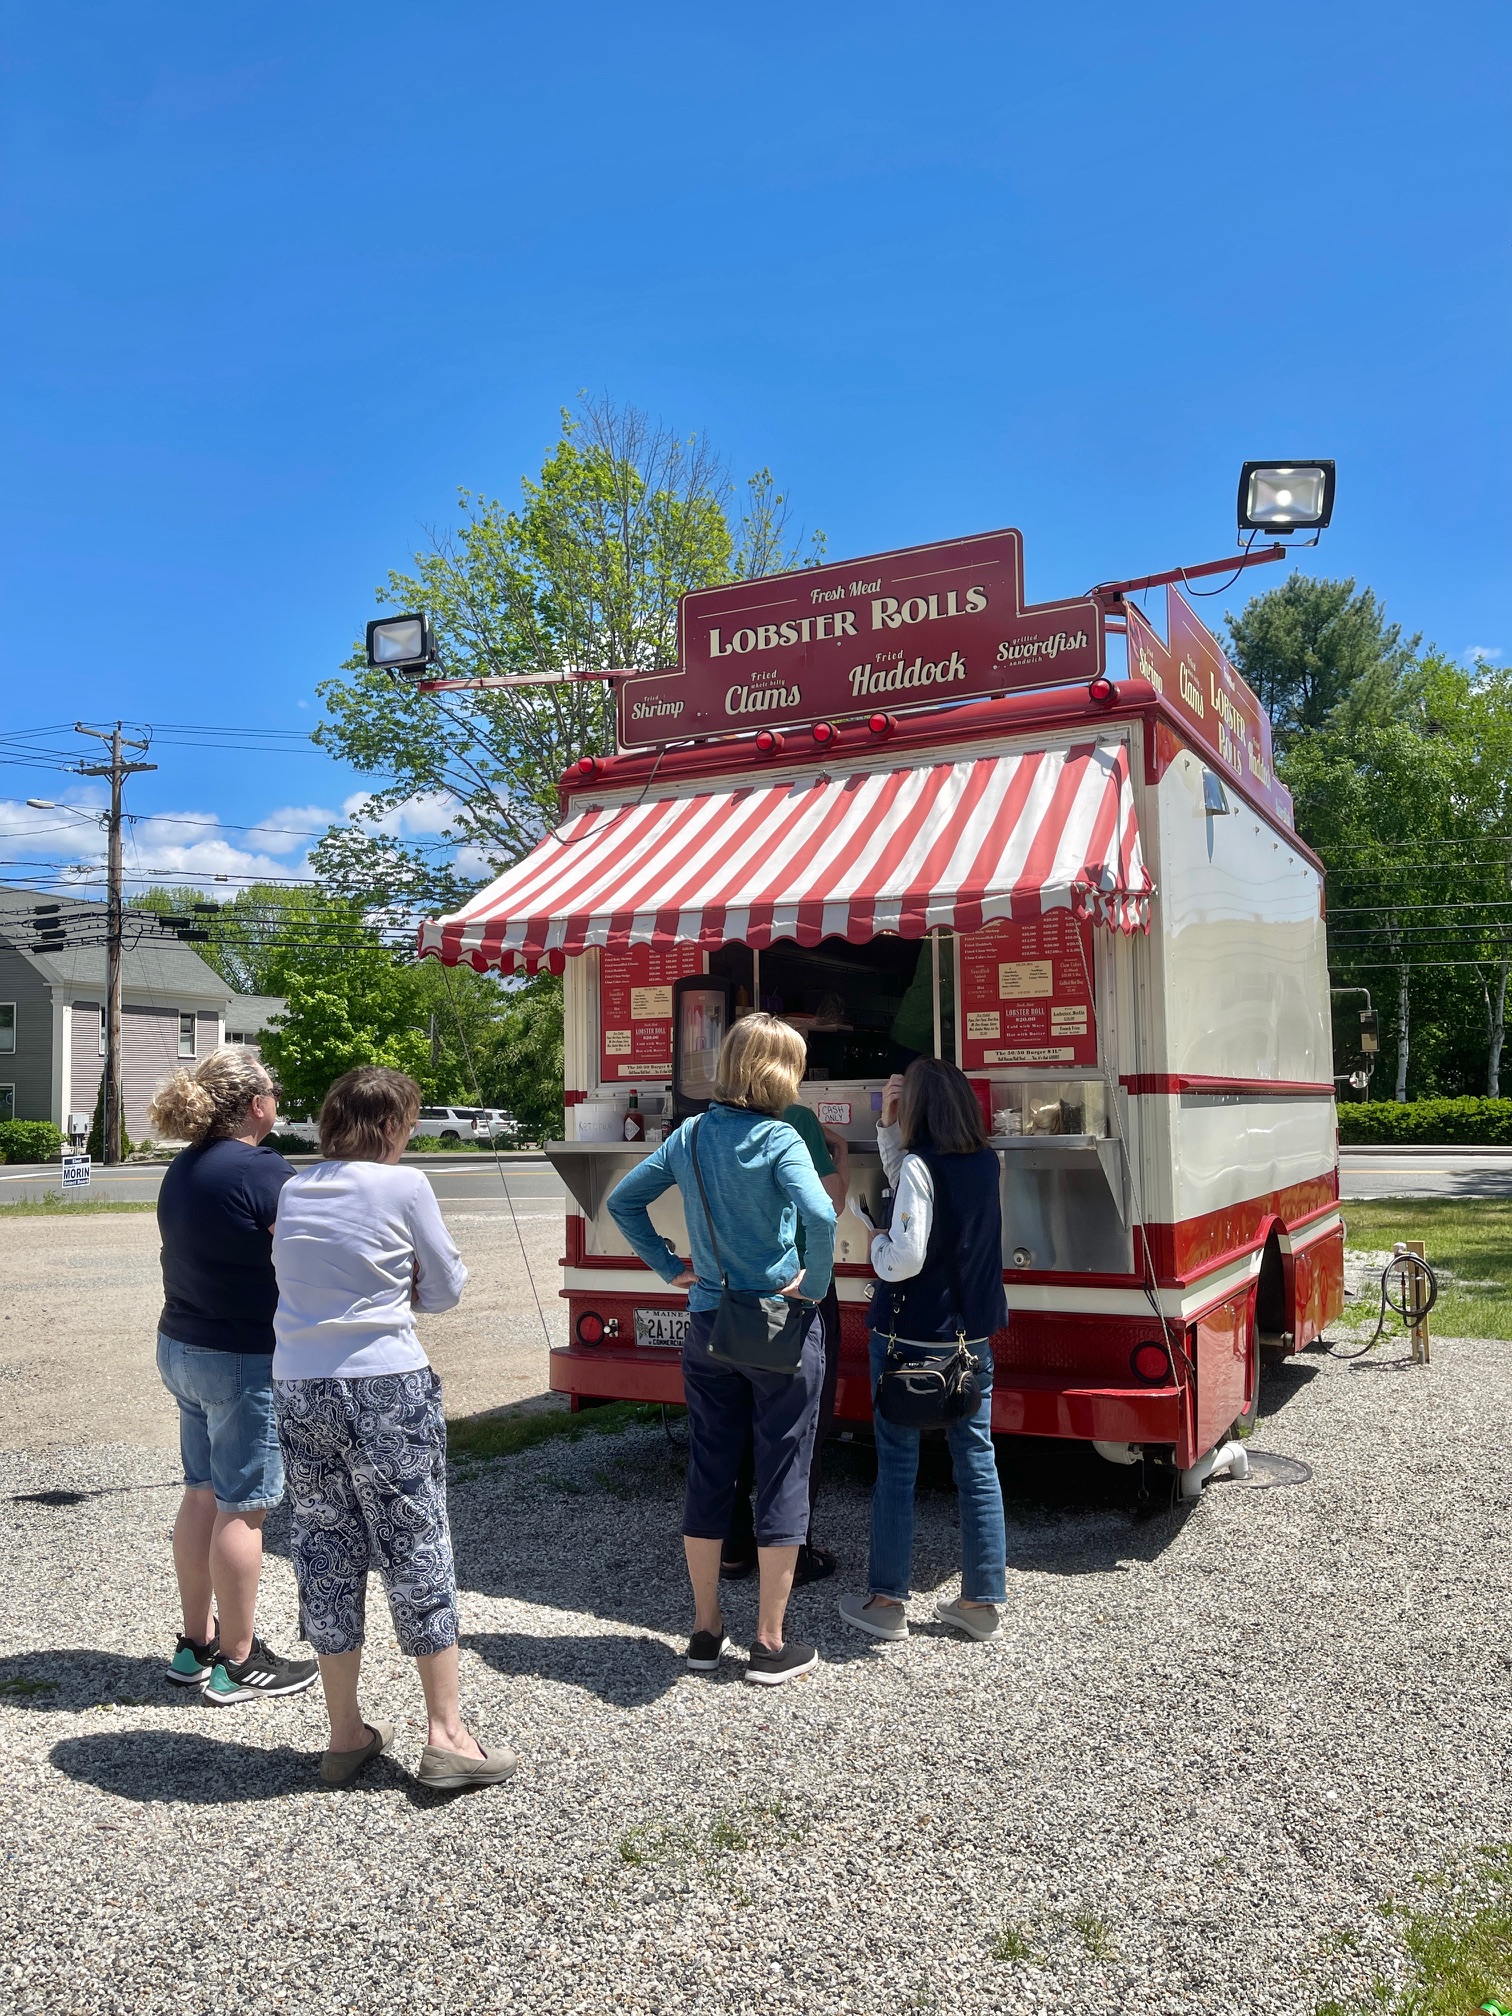 The Ocean Roll ~ An Antique Truck Serving Maine Seafood